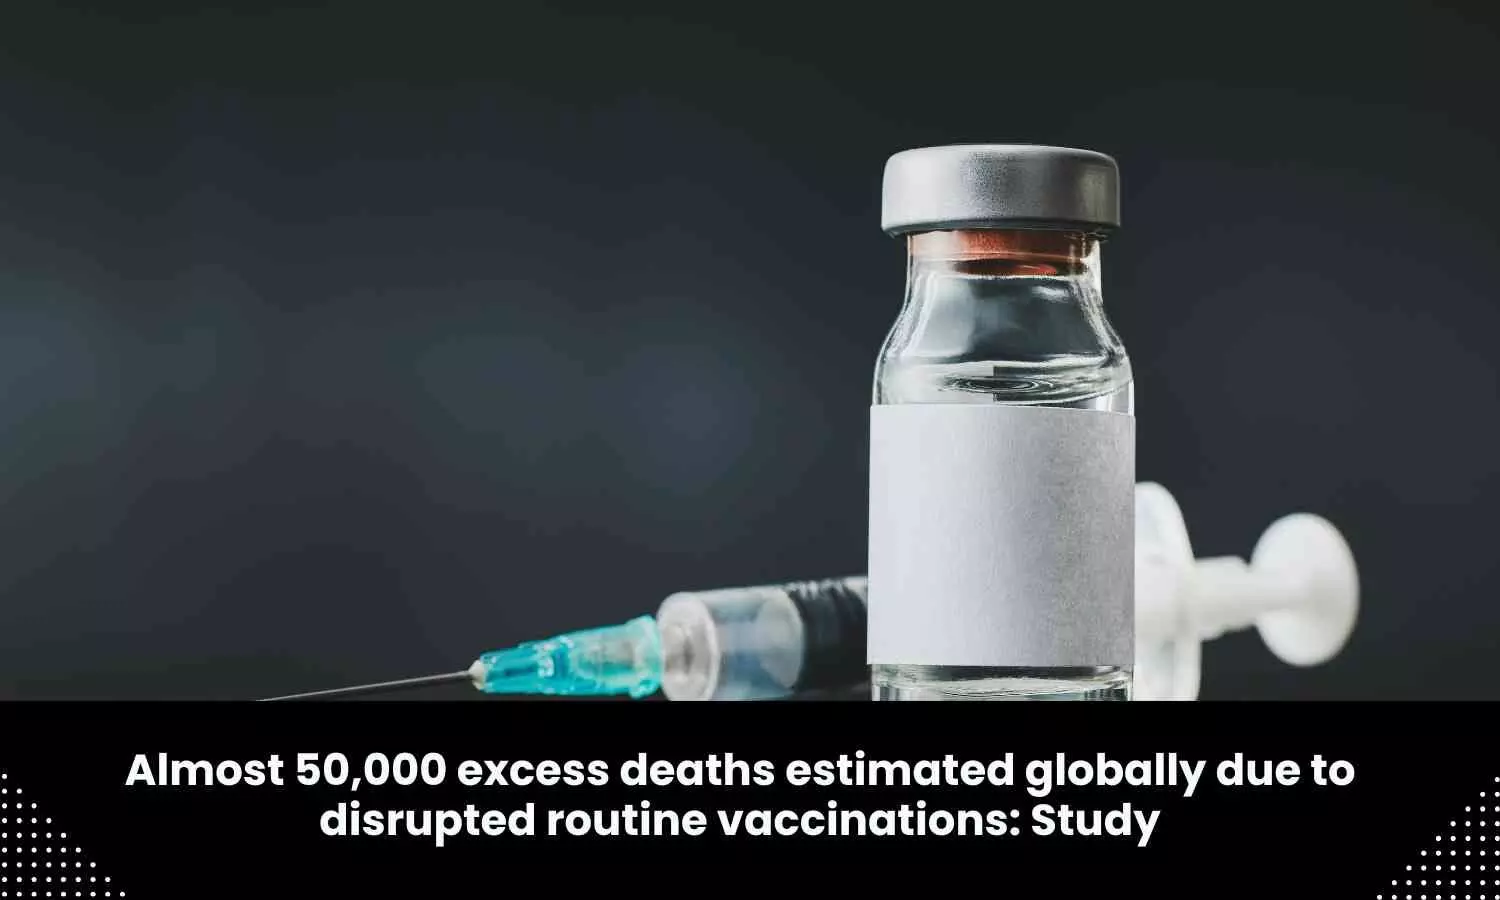 Close to 50,000 excess deaths estimated globally due to disrupted routine vaccinations, finds Study